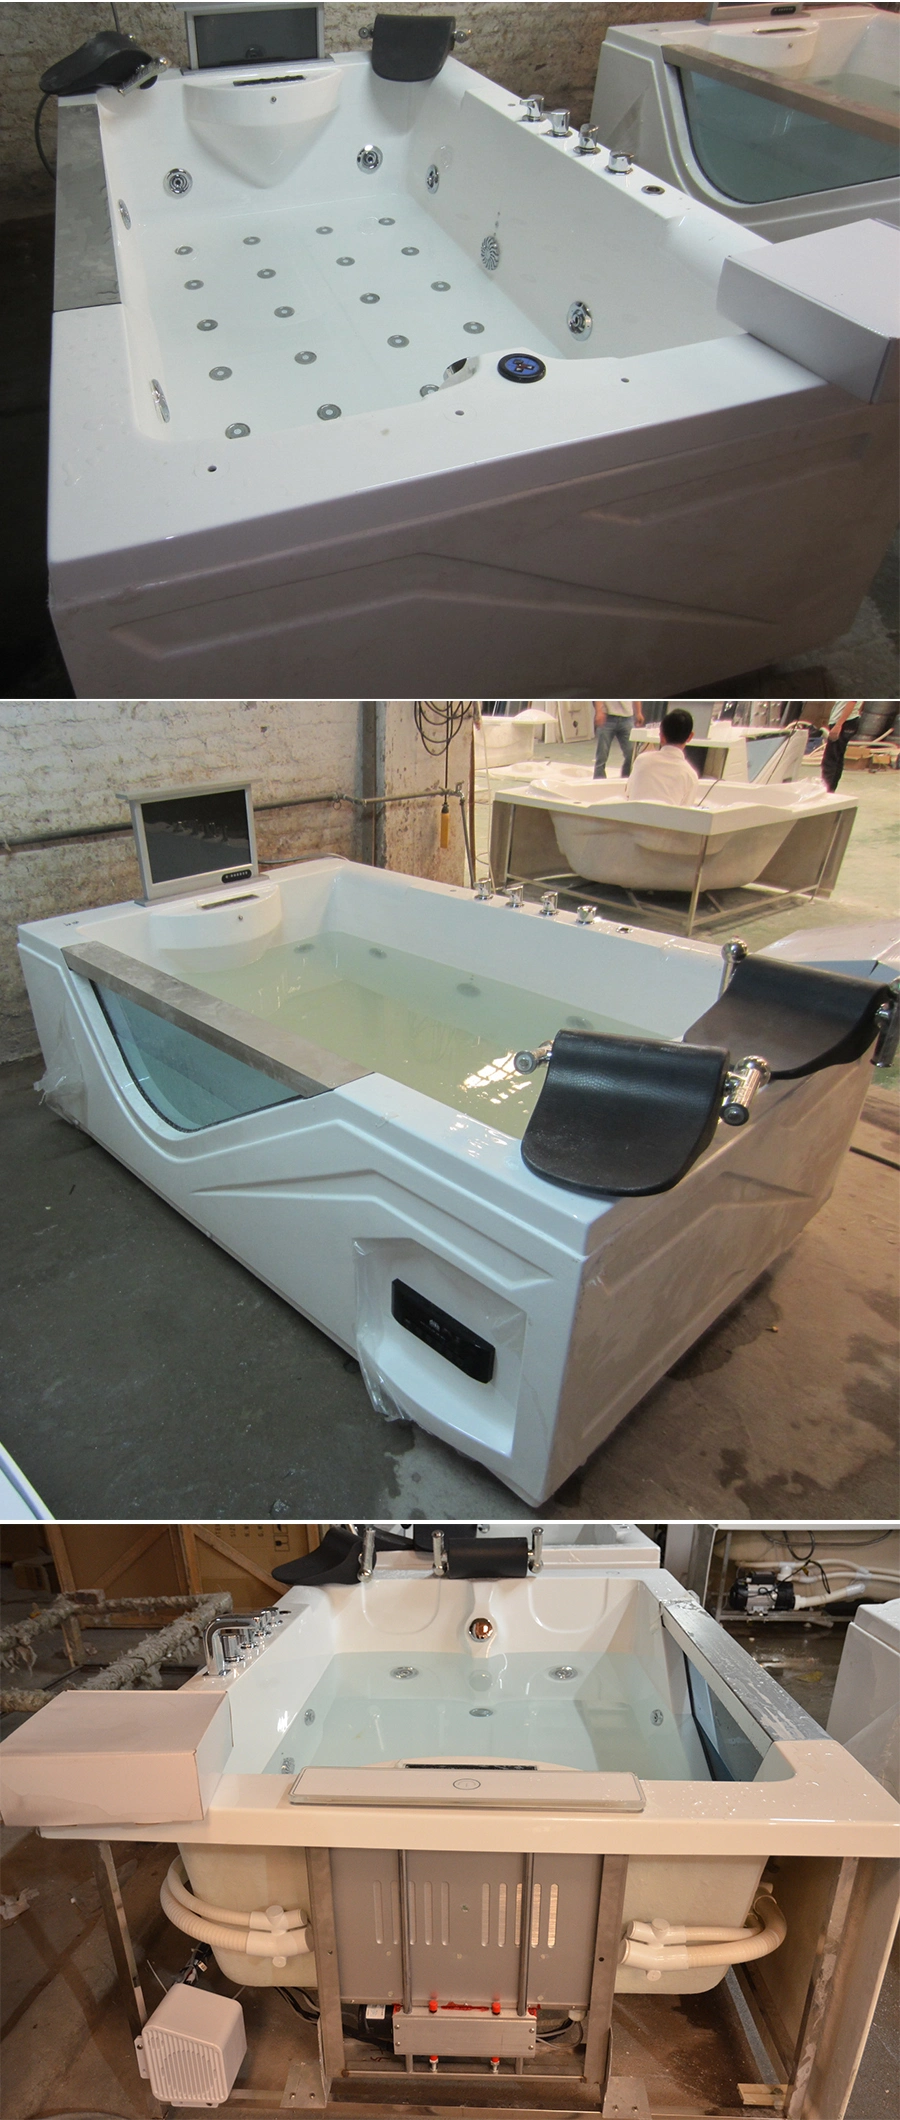 Double Seat Home 2 Person Jetted Massage Acrylic Chinese Bathtub for Sale